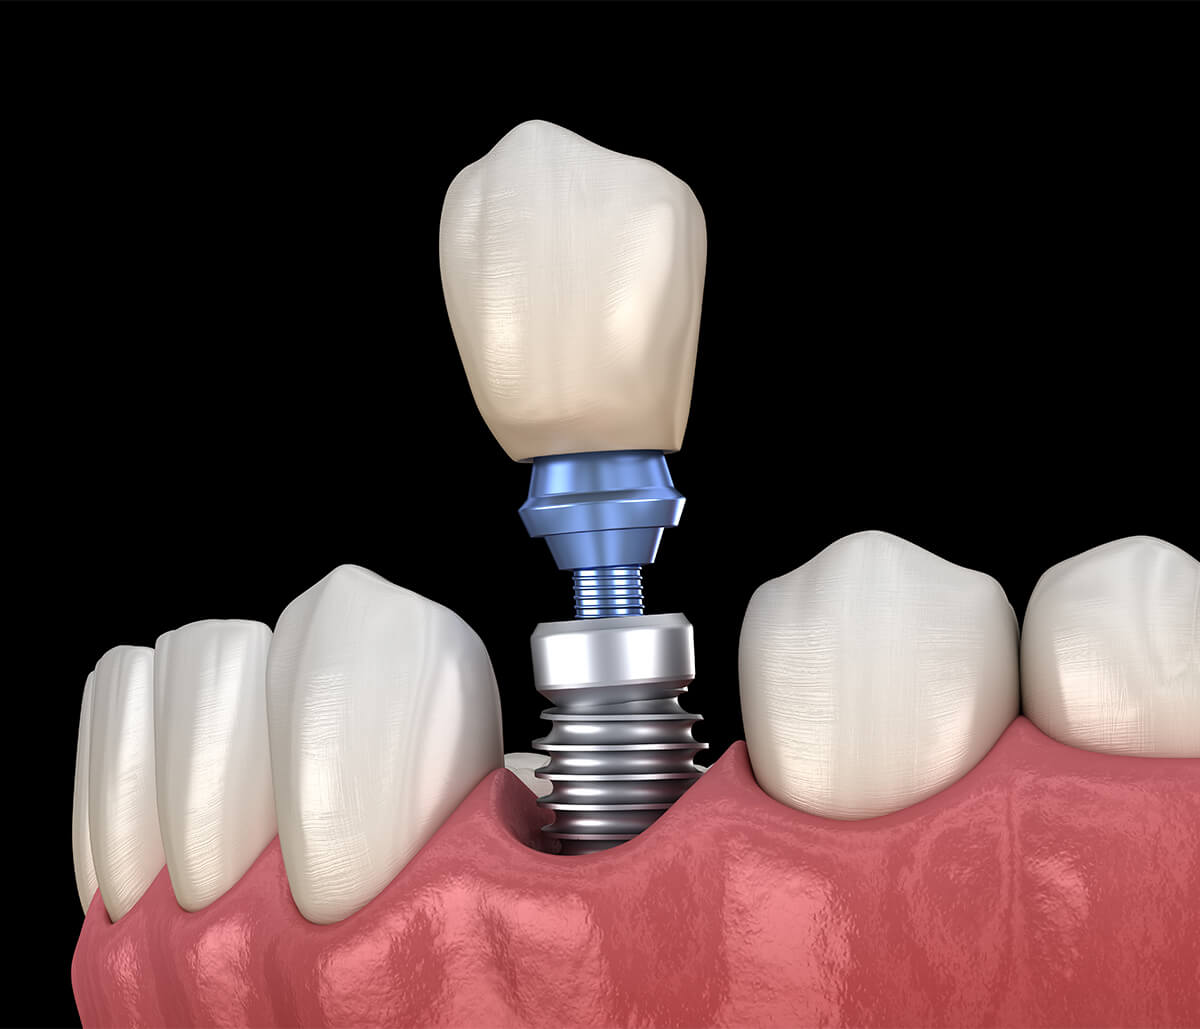 Dental Implant Services in Longview TX Area